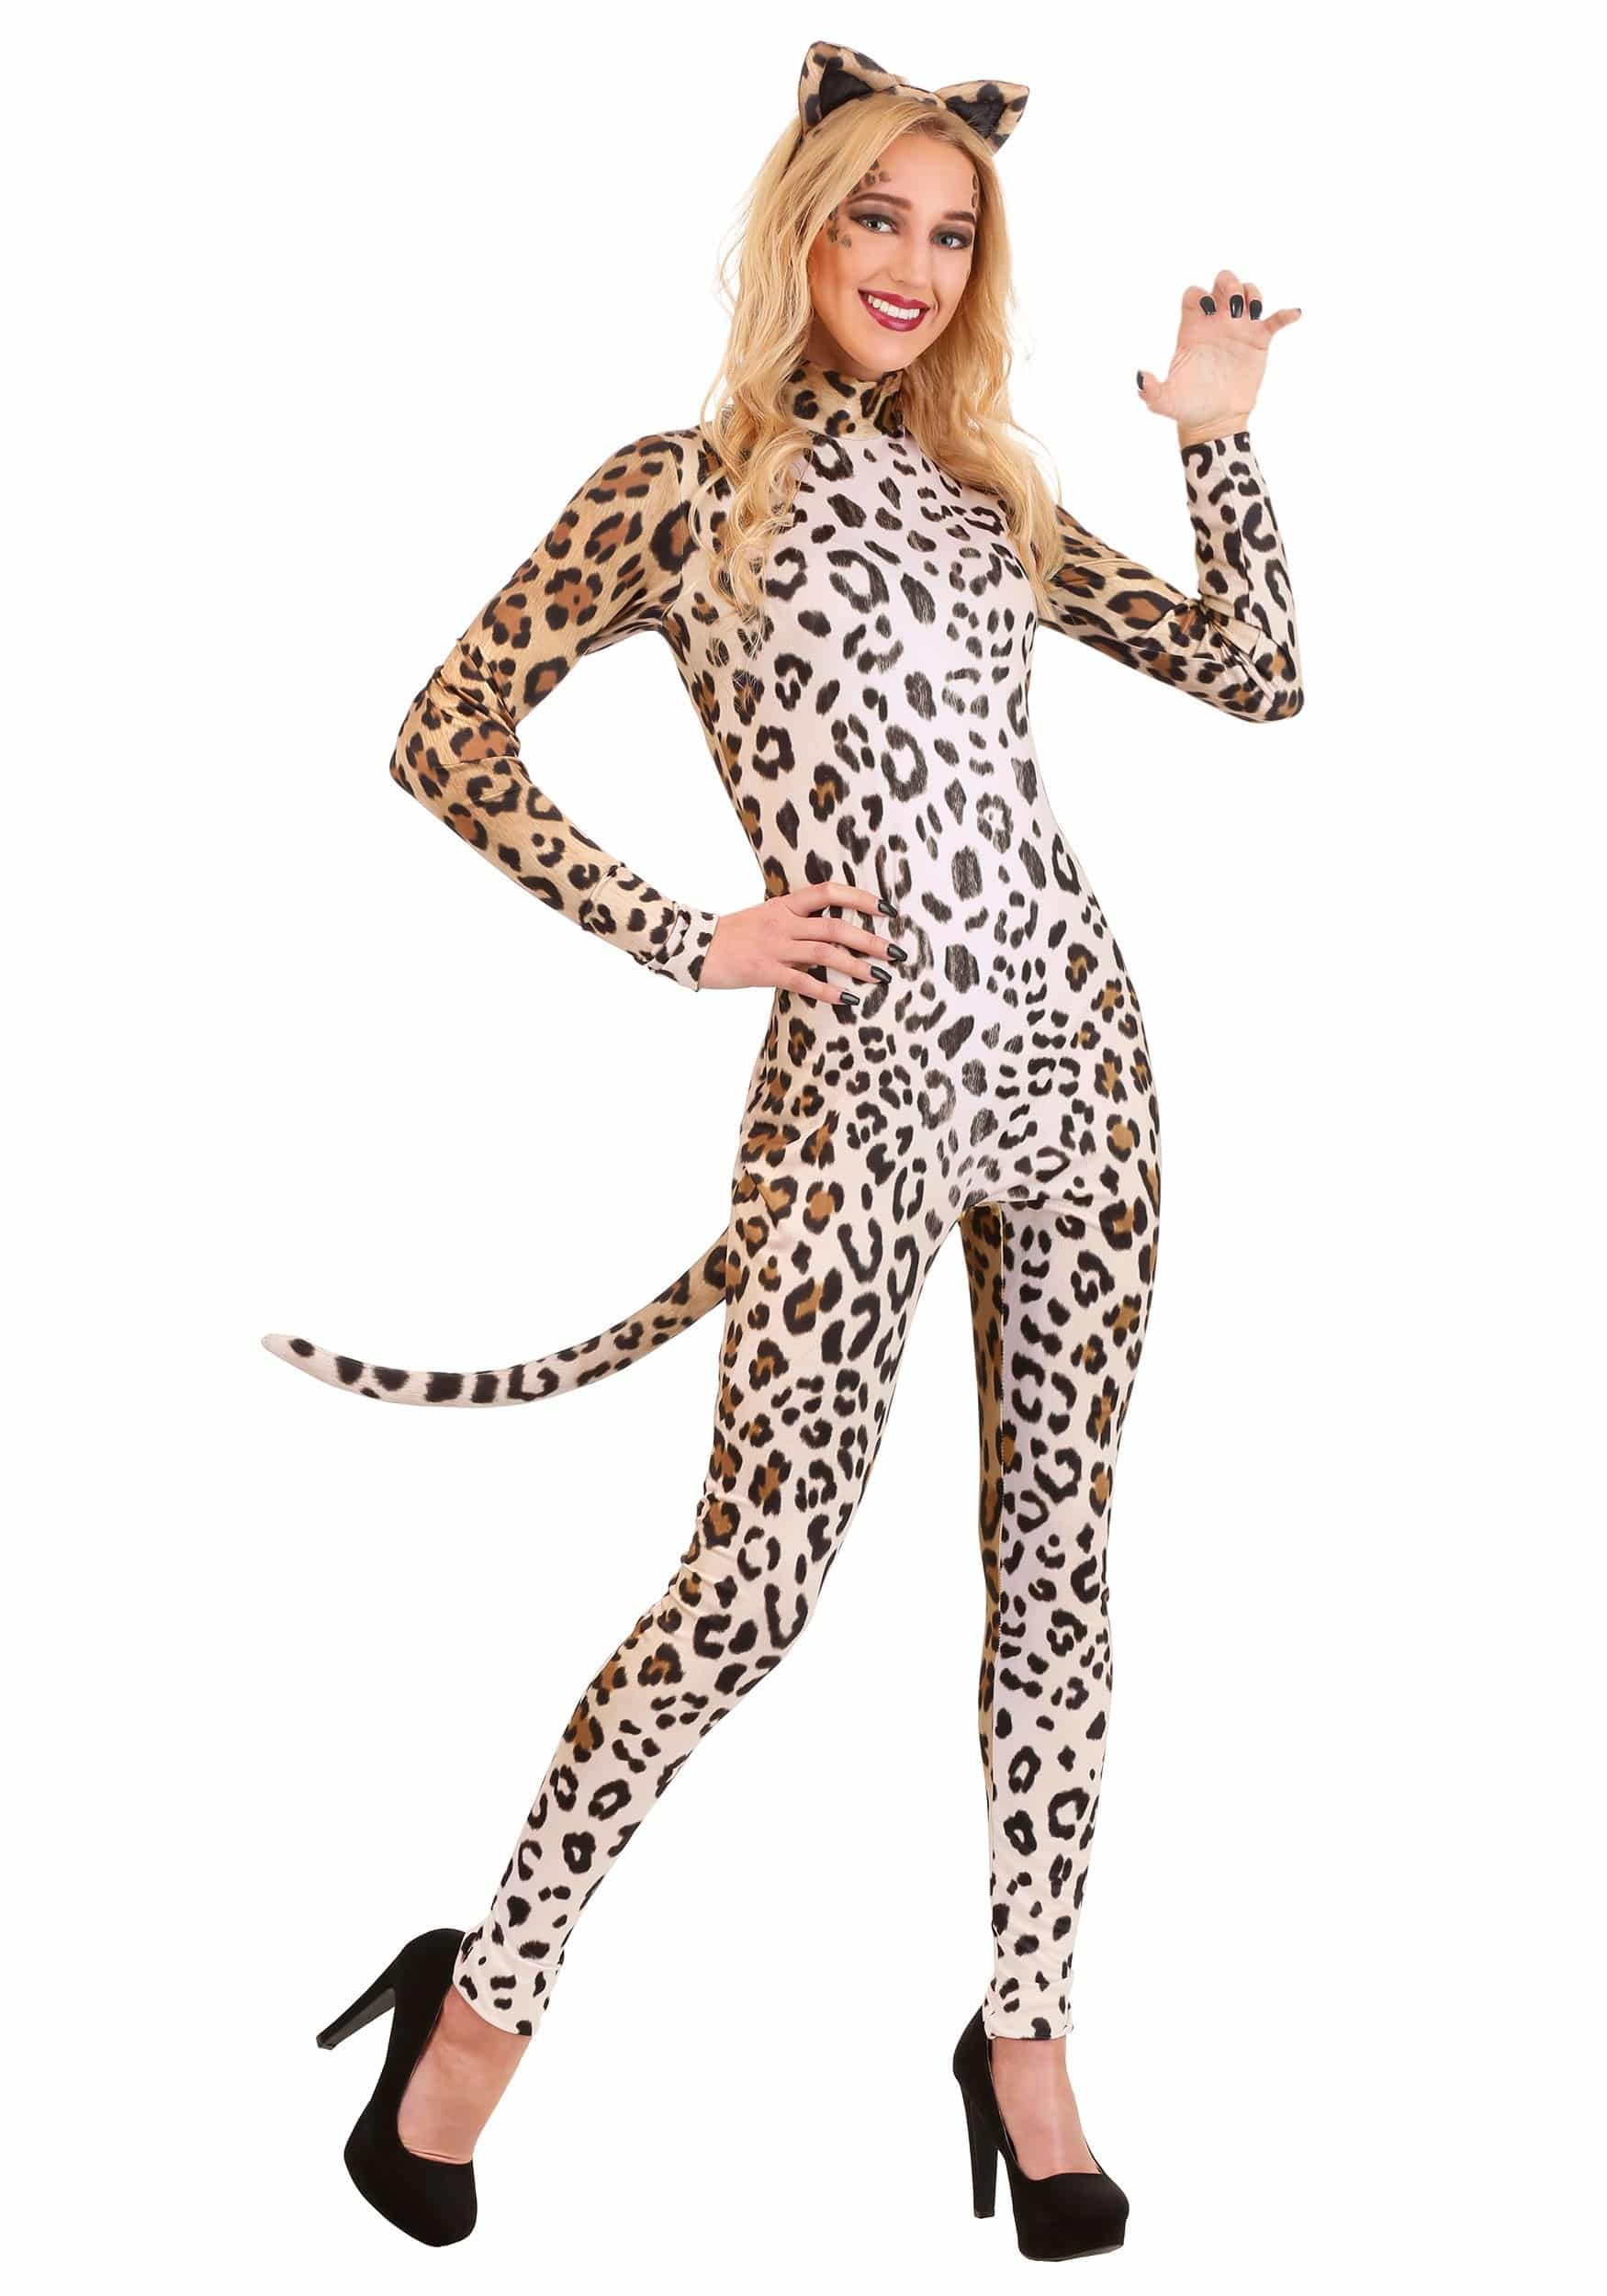 Leopard Catsuit Costume for Women